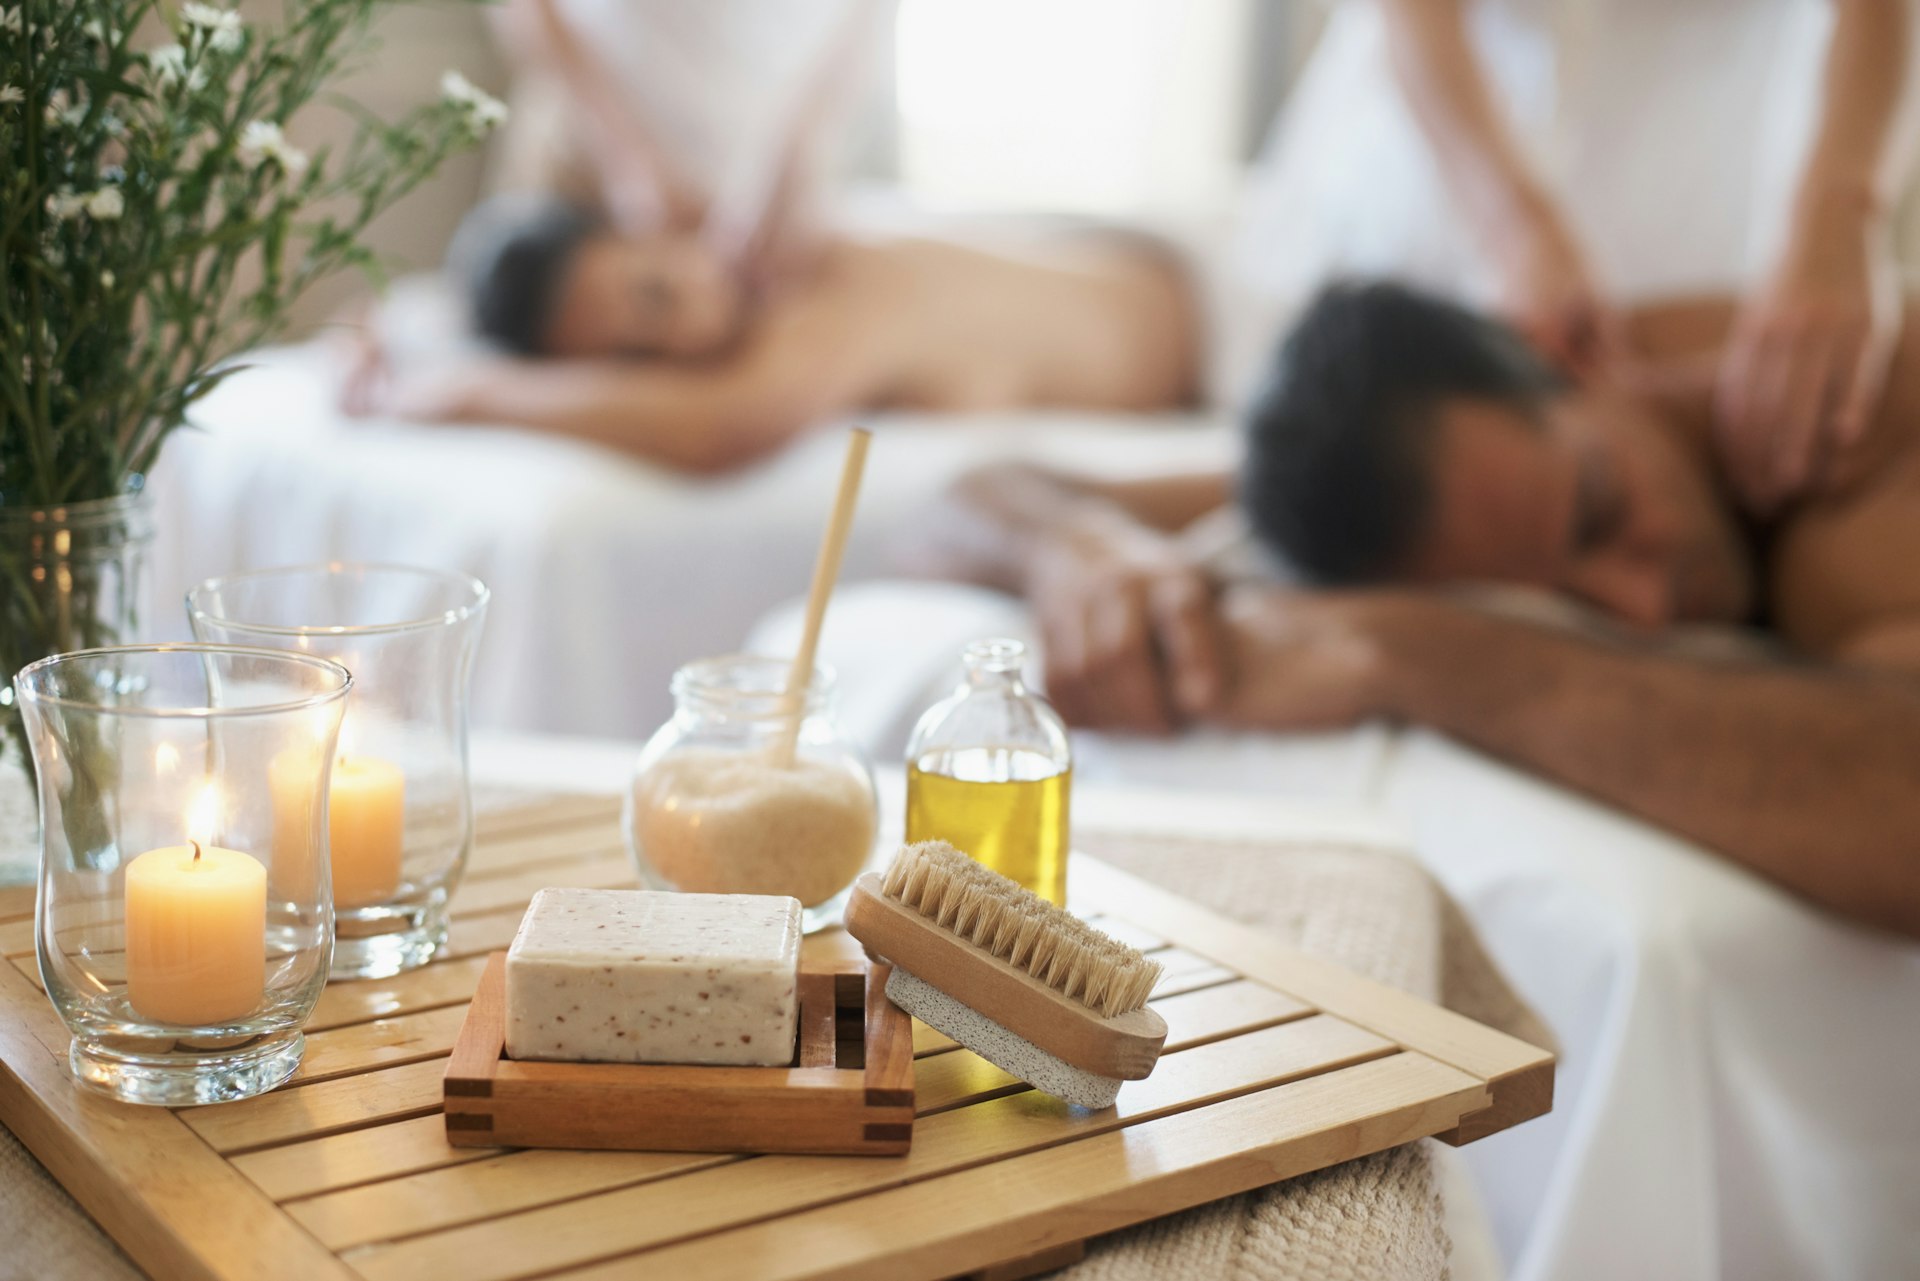 A man and woman enjoy a luxurious massage in a white-walled spa.